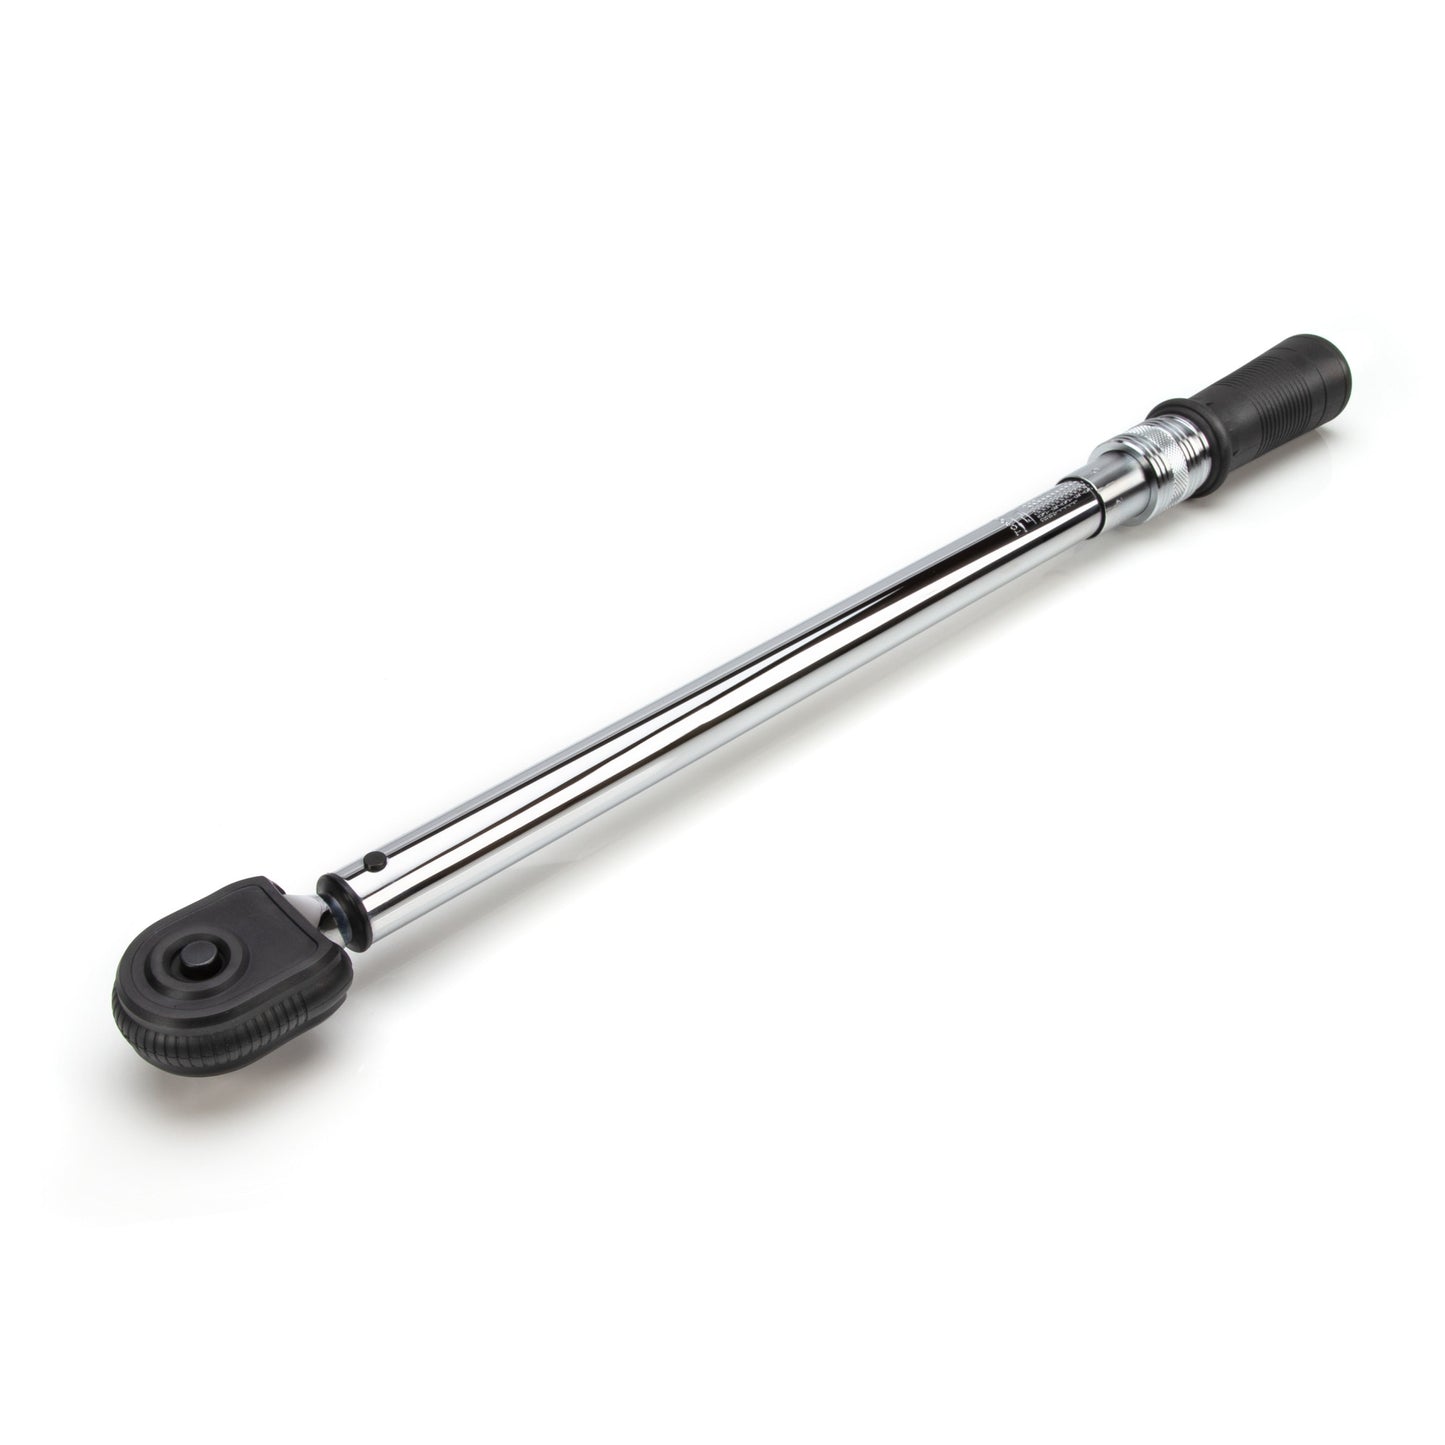 1/2-Inch Drive 32-Tooth Heavy Duty Adjustable Torque Wrench, 30-250 Foot-Pounds